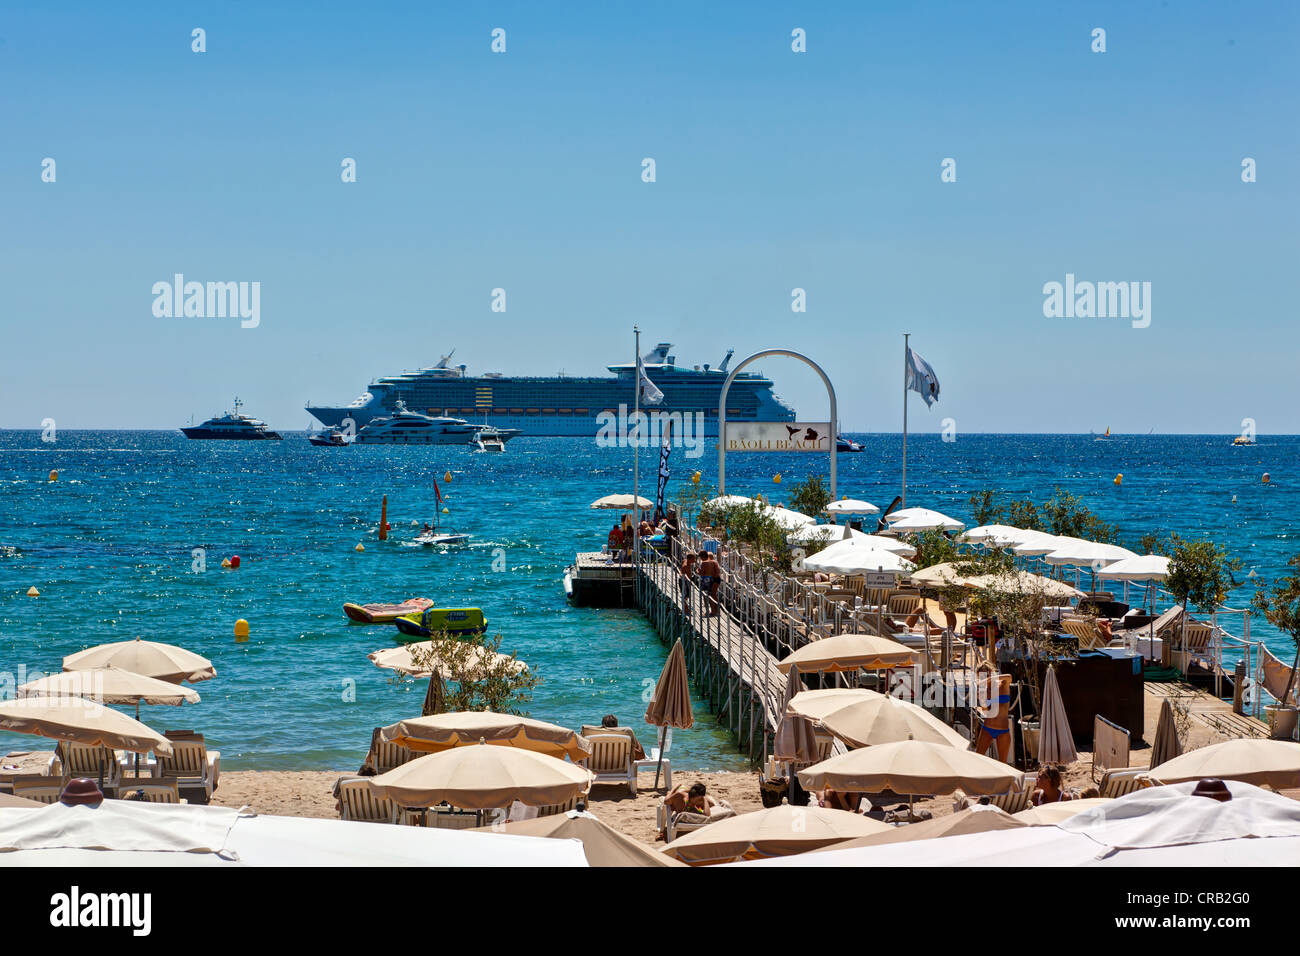 Beach of Cannes on the Croisette promonade, Cote d'Azur, Southern France, France, Europe, PublicGround Stock Photo